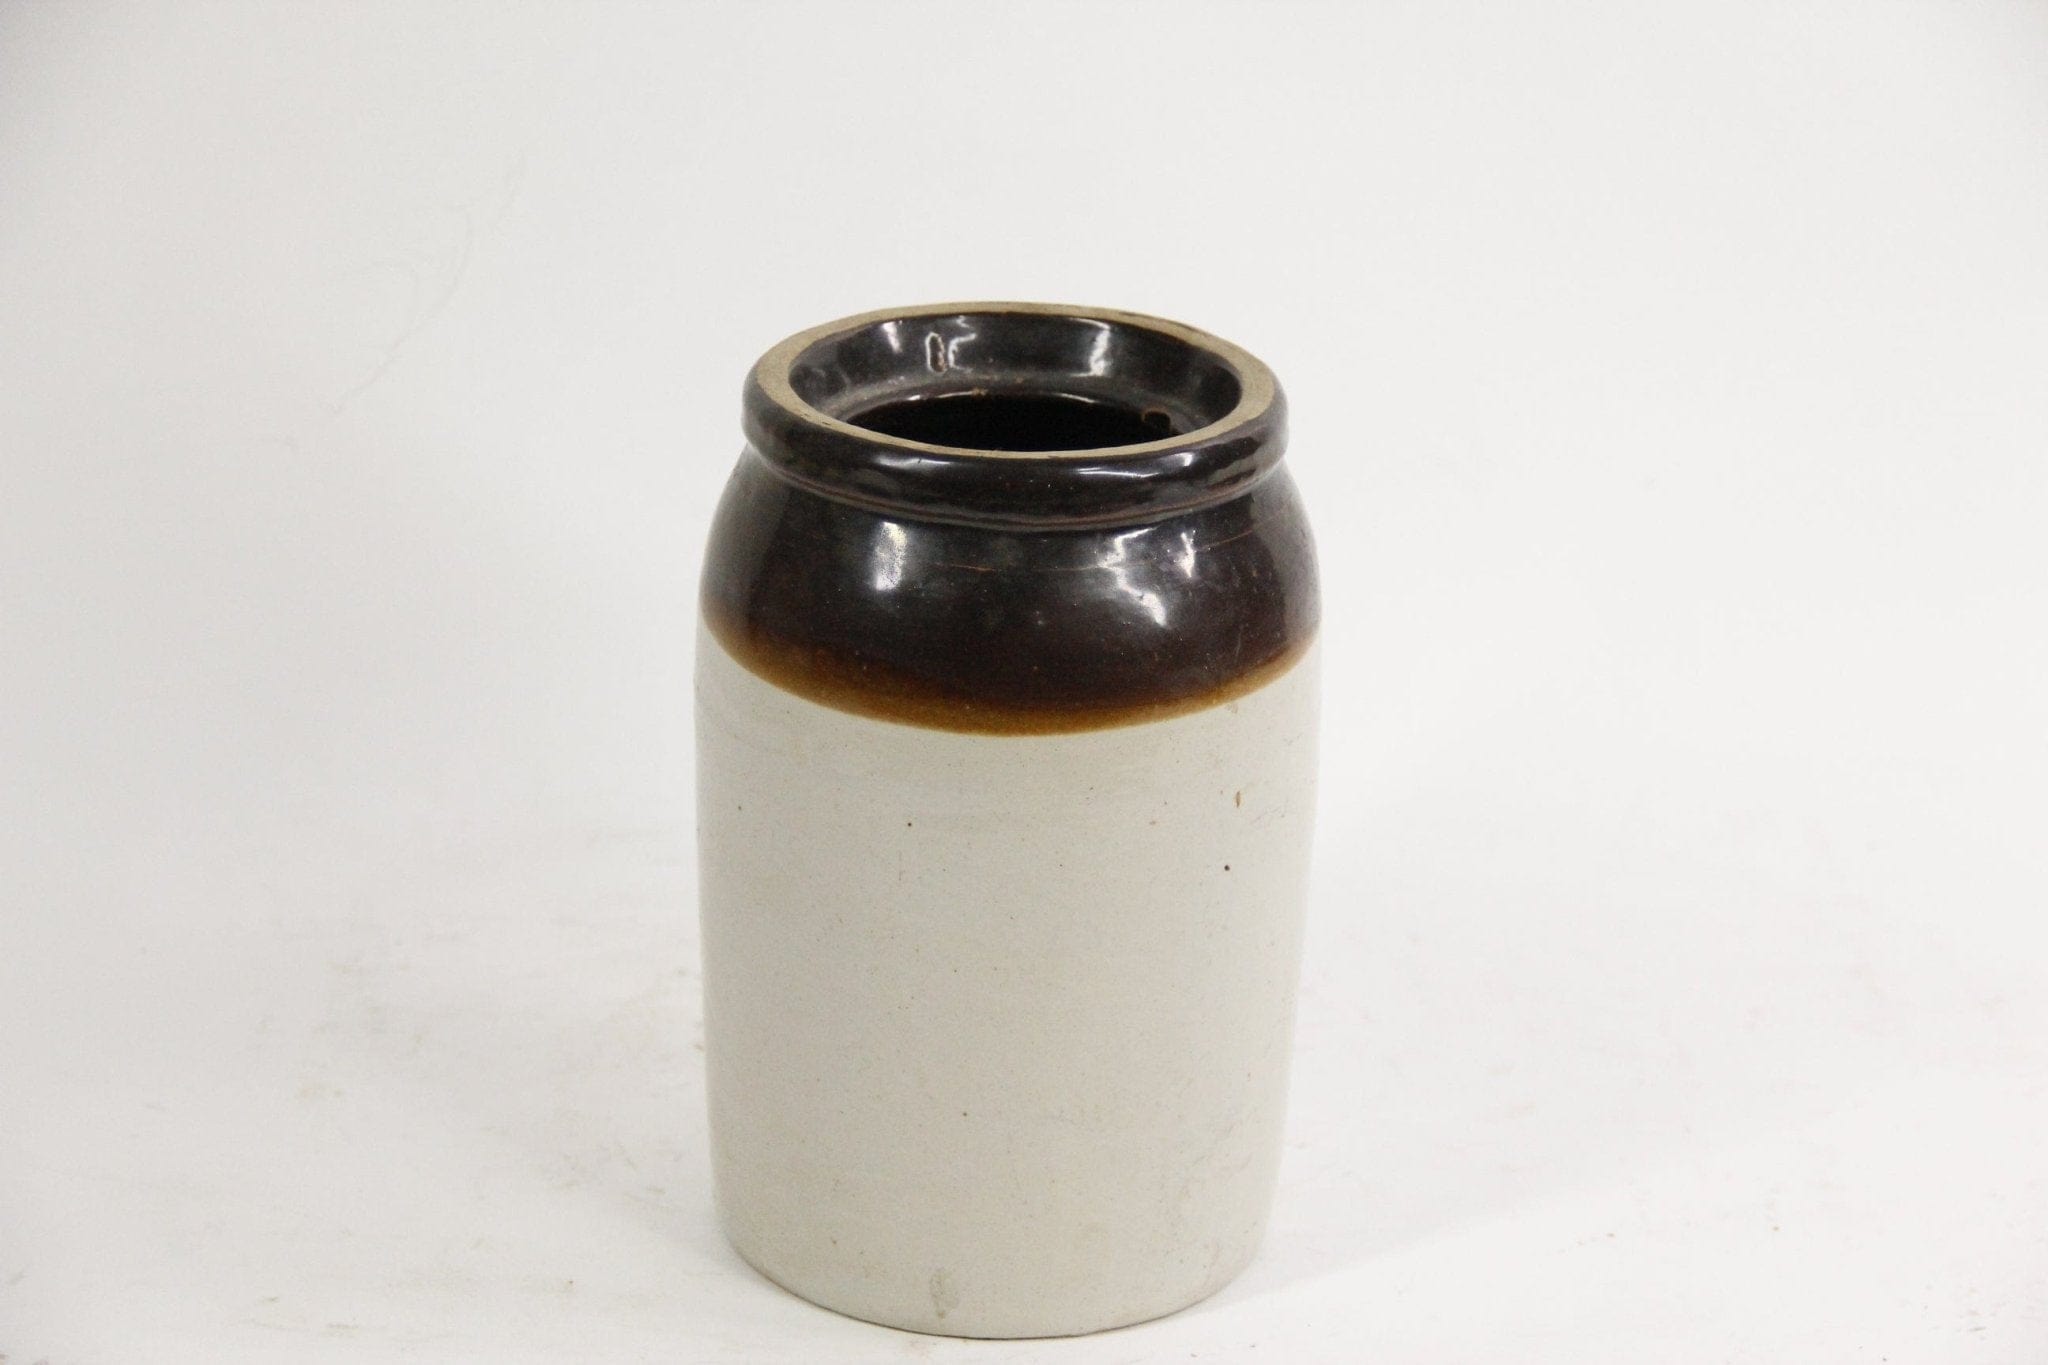 Antique Stoneware Canning Crock | Late 1800s Two Tone - Debra Hall Lifestyle